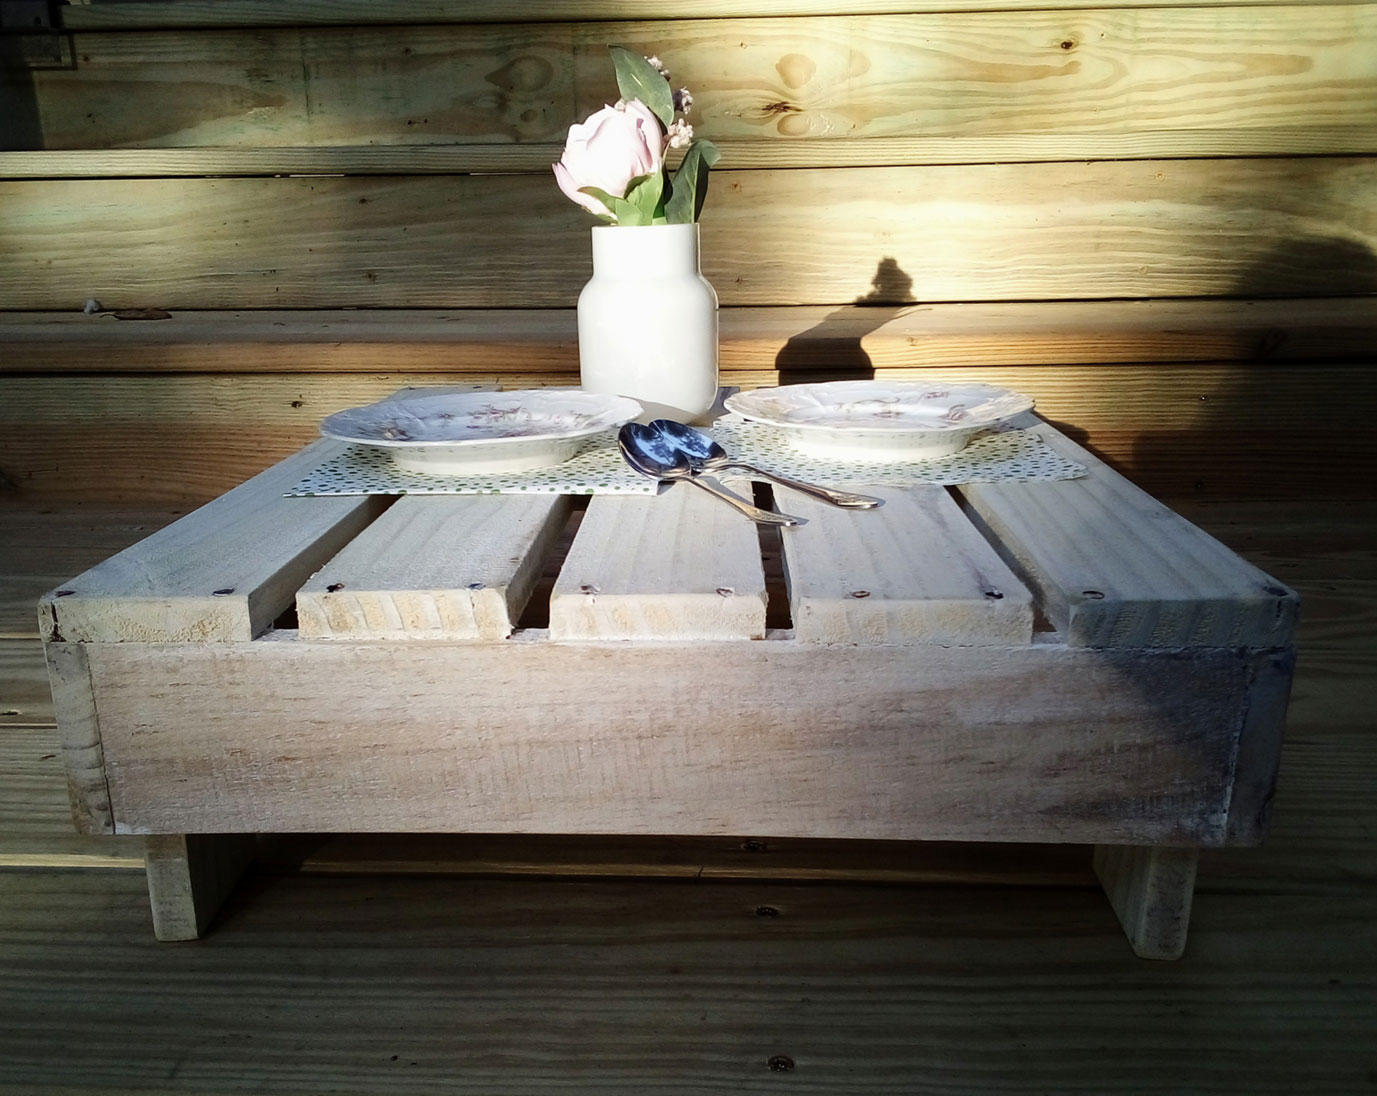 Reclaimed barn wood tray/table, bed tray, ottoman table, shabby, white washed stain, rustic - hand-crafted from recycled cedar wood